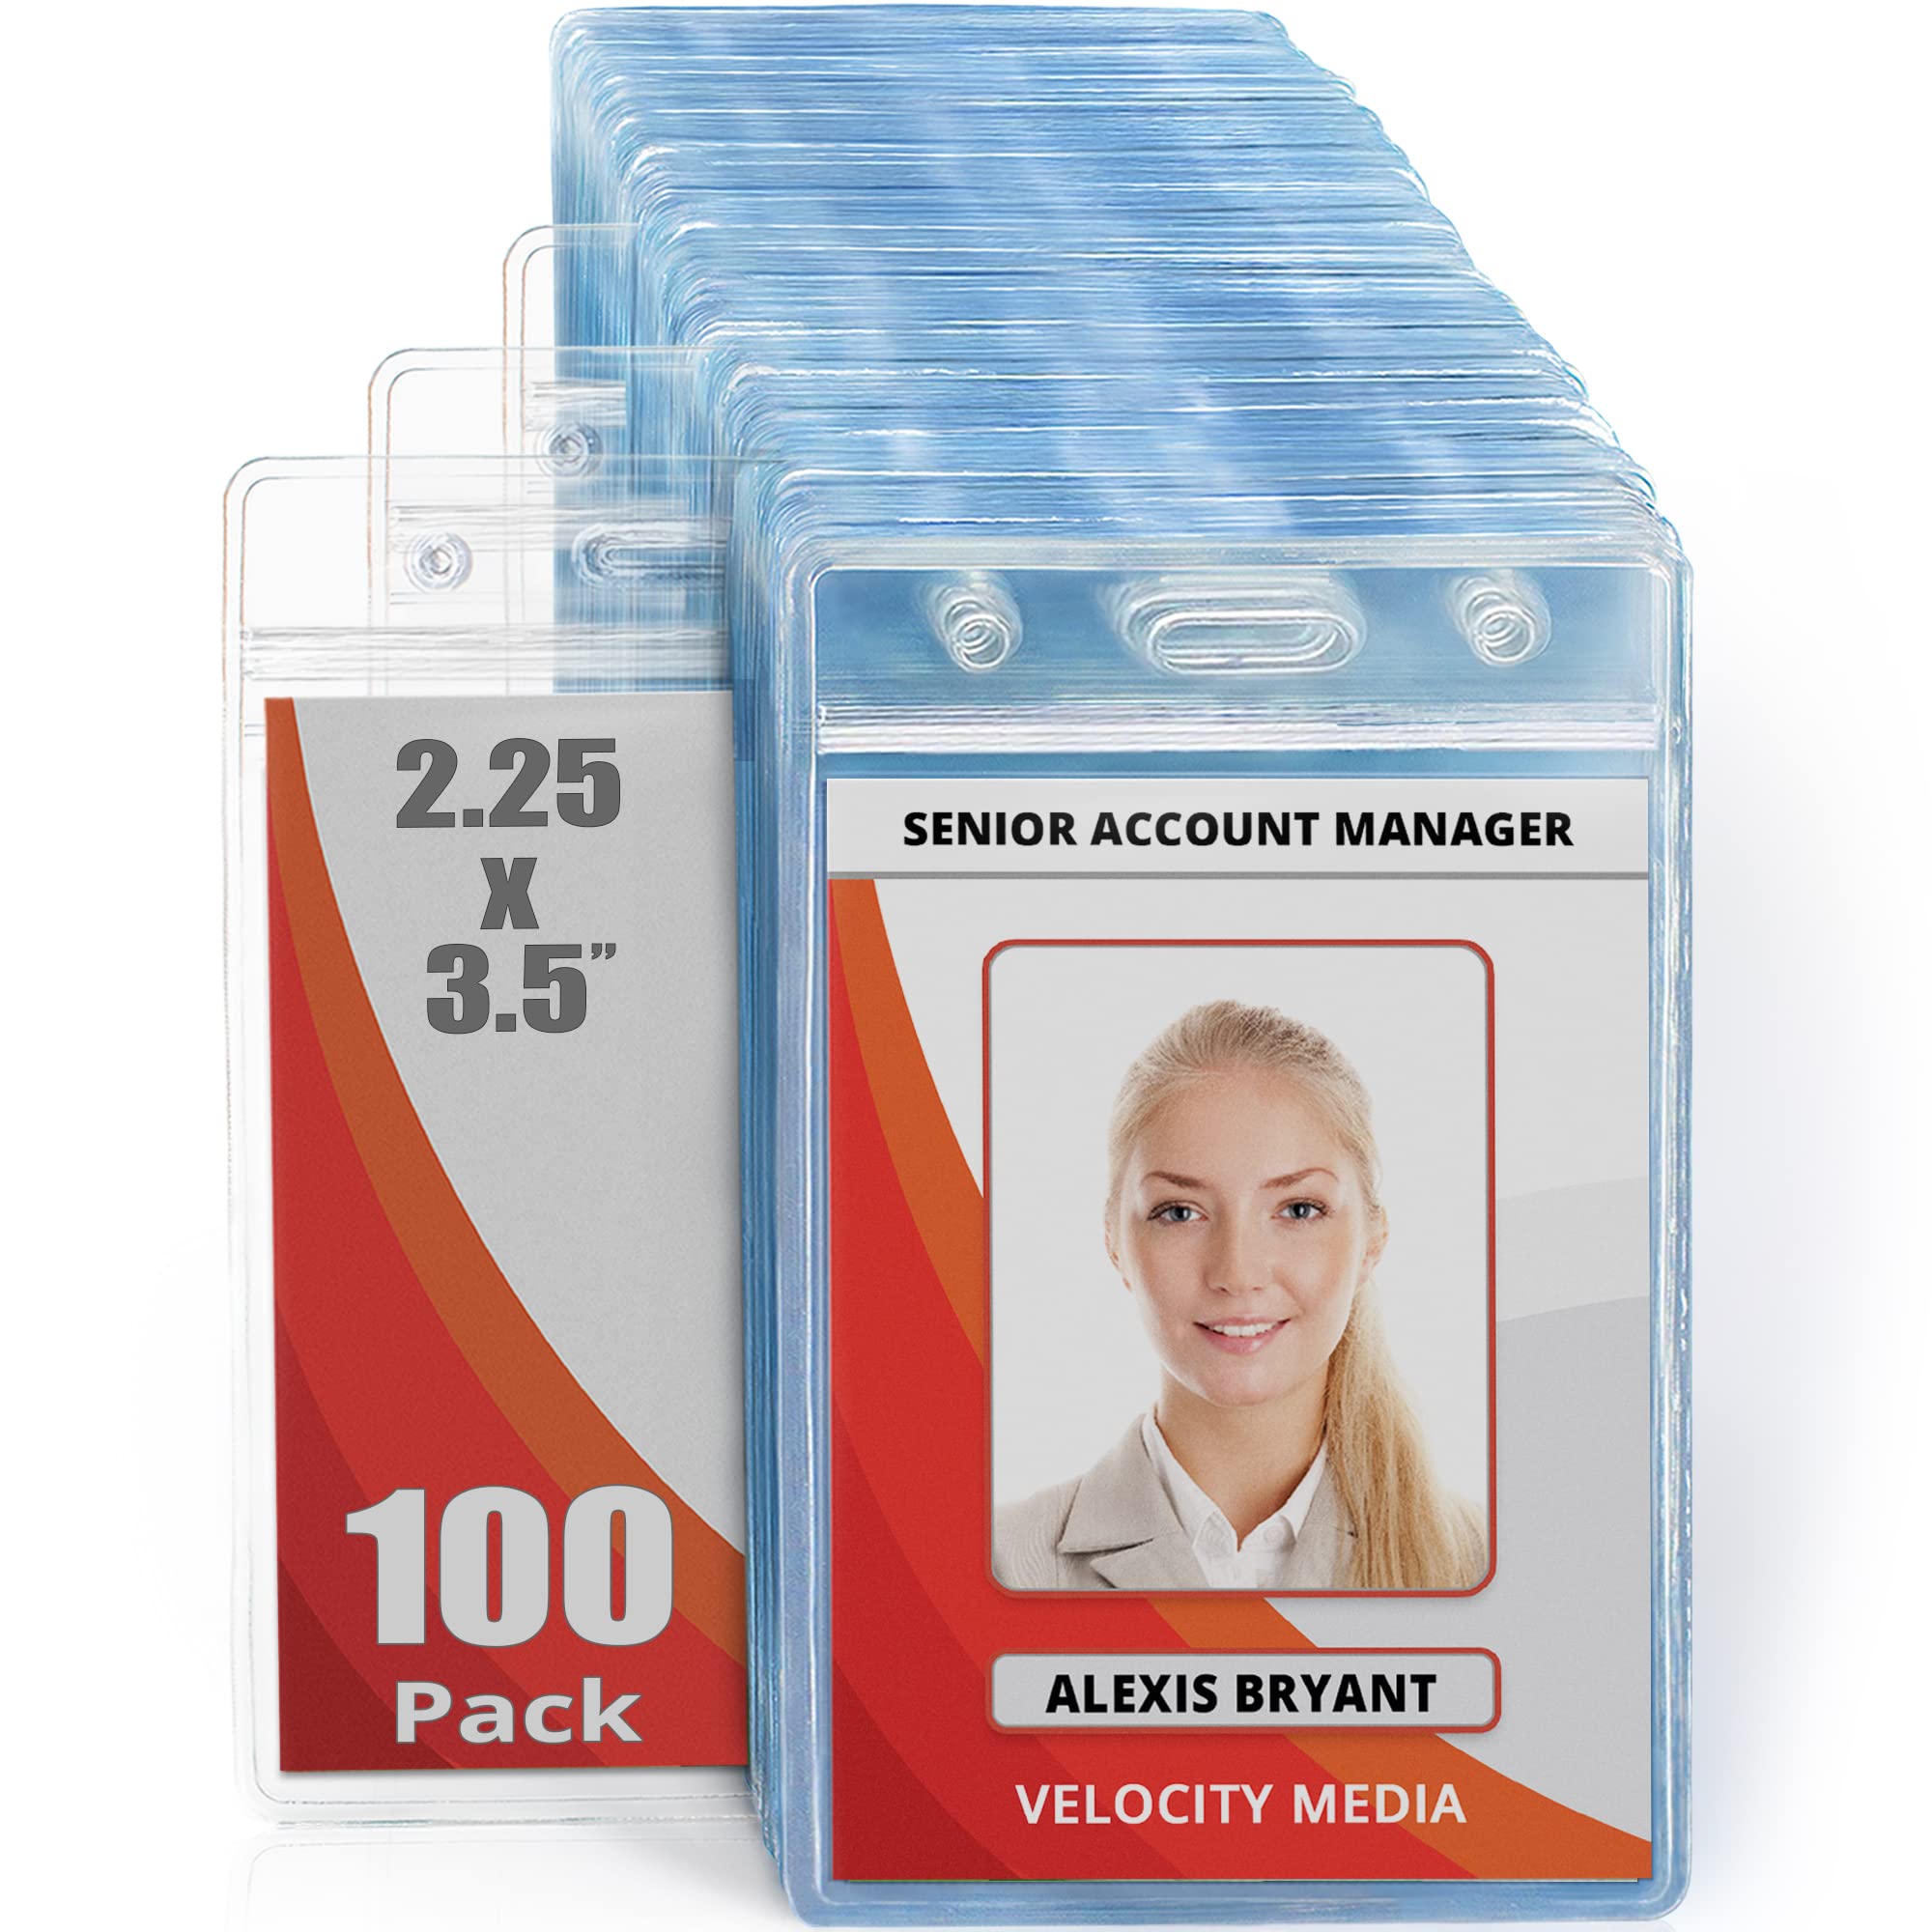 Book Cover Mifflin-USA Plastic Waterproof ID Badge Holders (Clear, 2.25x3.5 Inch, 100 Pack), Vertical Hanging Name Card Holder with Zipper, Resealable Bulk Nametag Holders